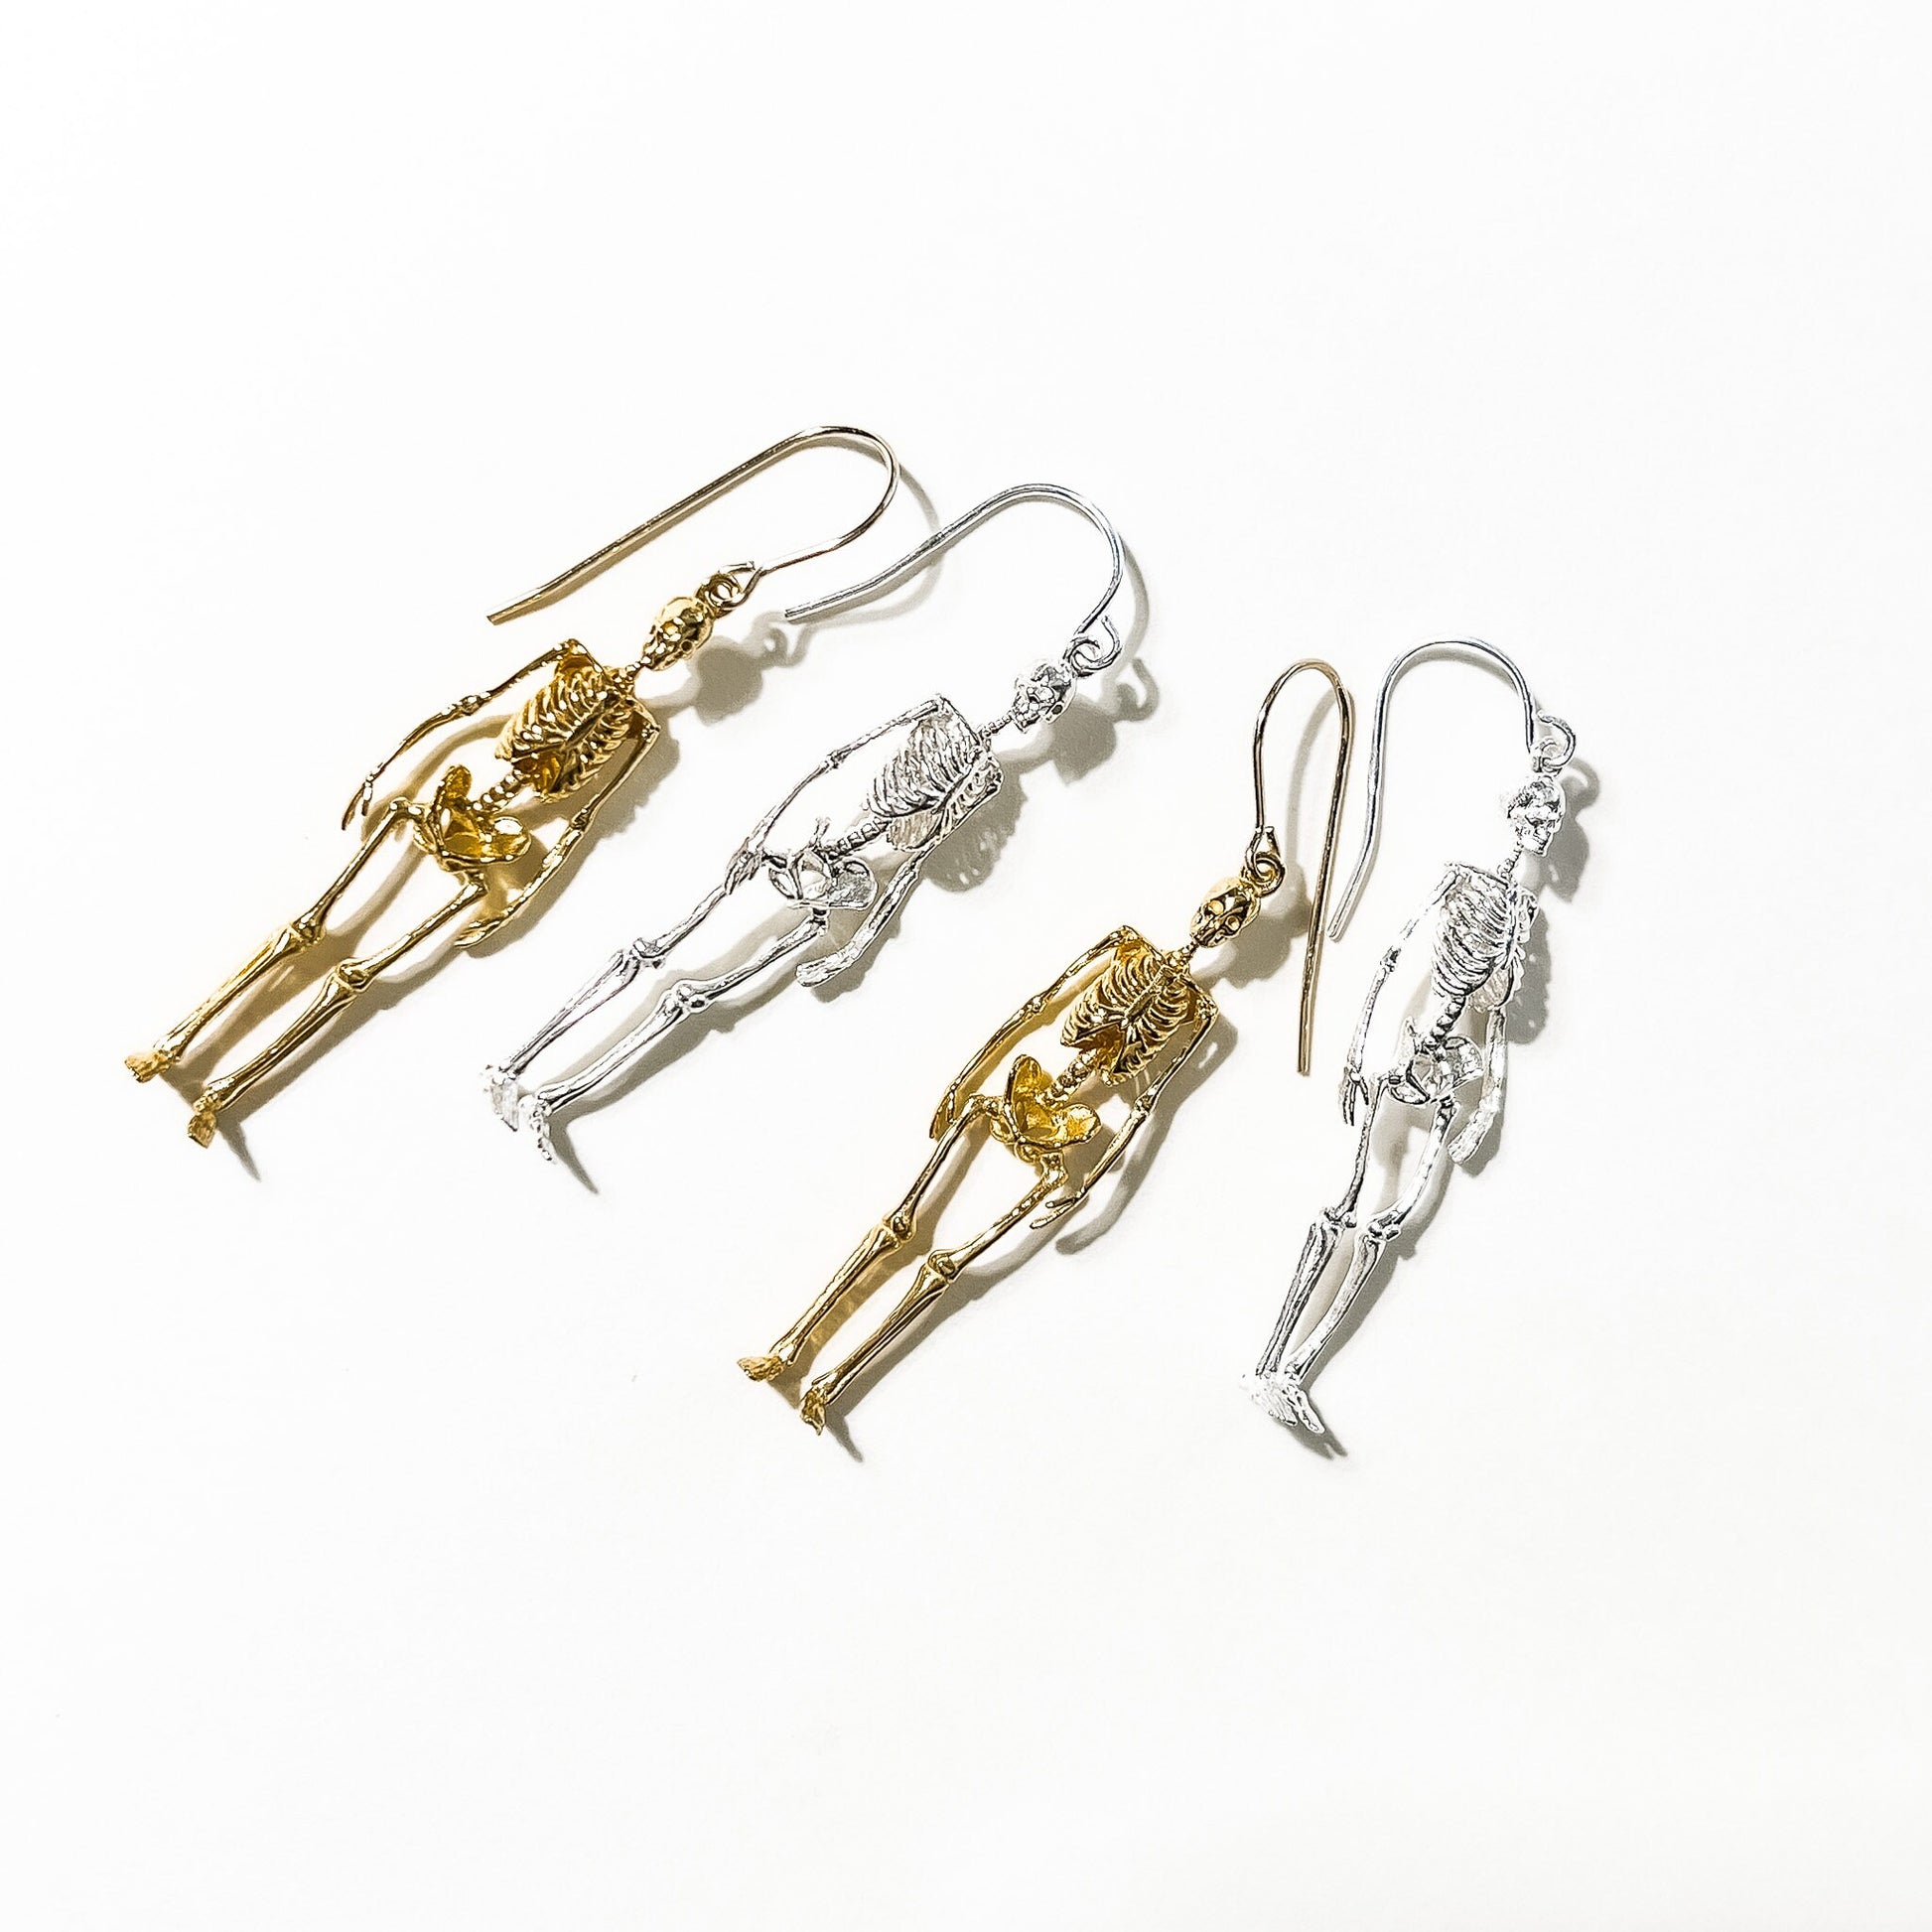 Halloween Skeleton Earrings in Sterling Silver, Vermeil, Solid Gold, and Gold Plate, Day of the Dead Earrings